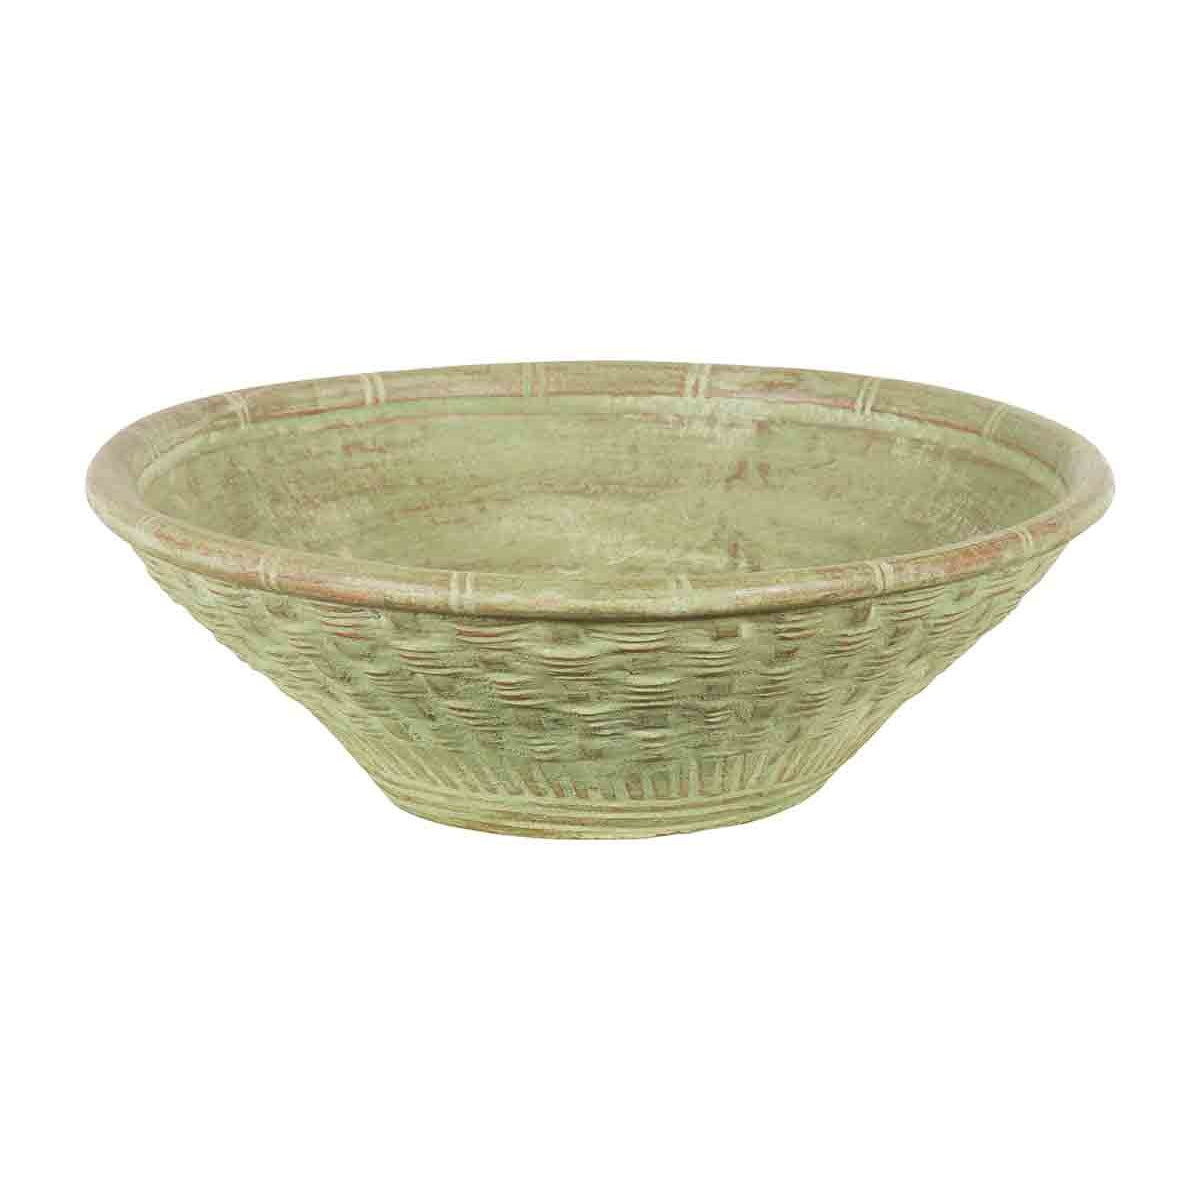 Vintage Thai Terracotta Wicker Style Circular Tapering Bowl with Green Patina- Asian Antiques, Vintage Home Decor & Chinese Furniture - FEA Home